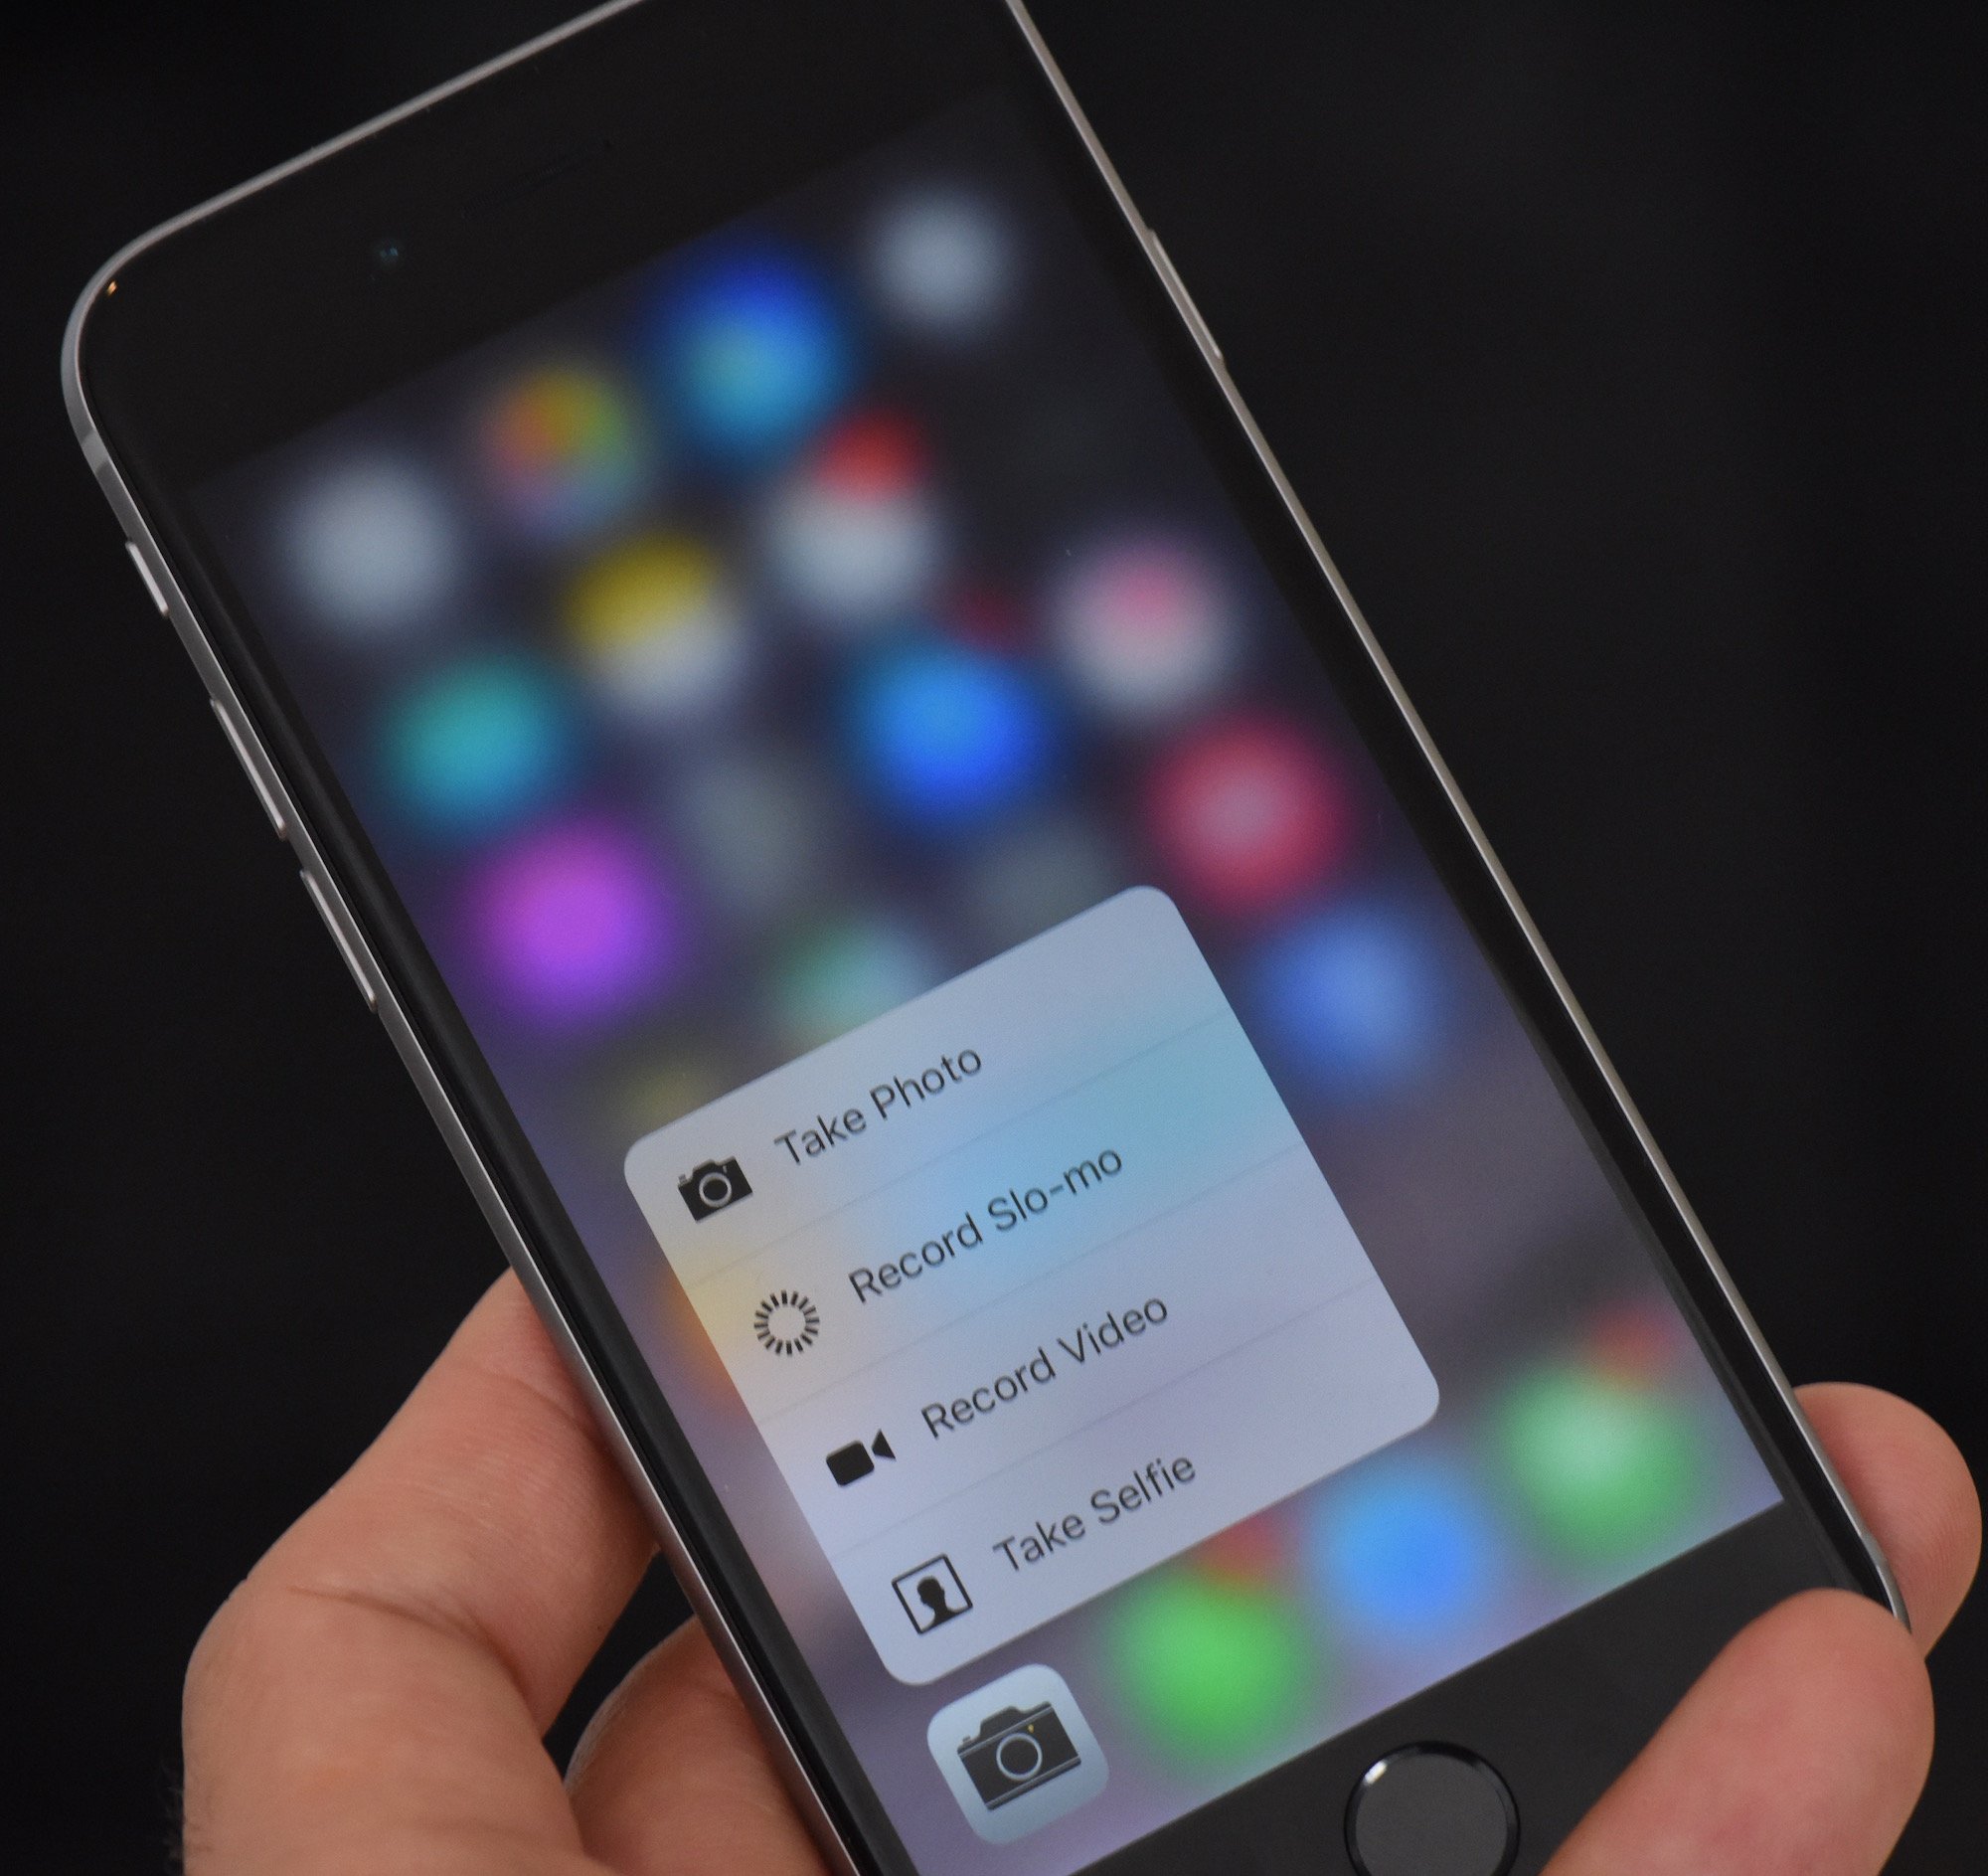 How to use 3D Touch, how to turn 3D Touch off and how to change 3D Touch sensitivity on the iPhone 6s and iPhone 6s Plus.